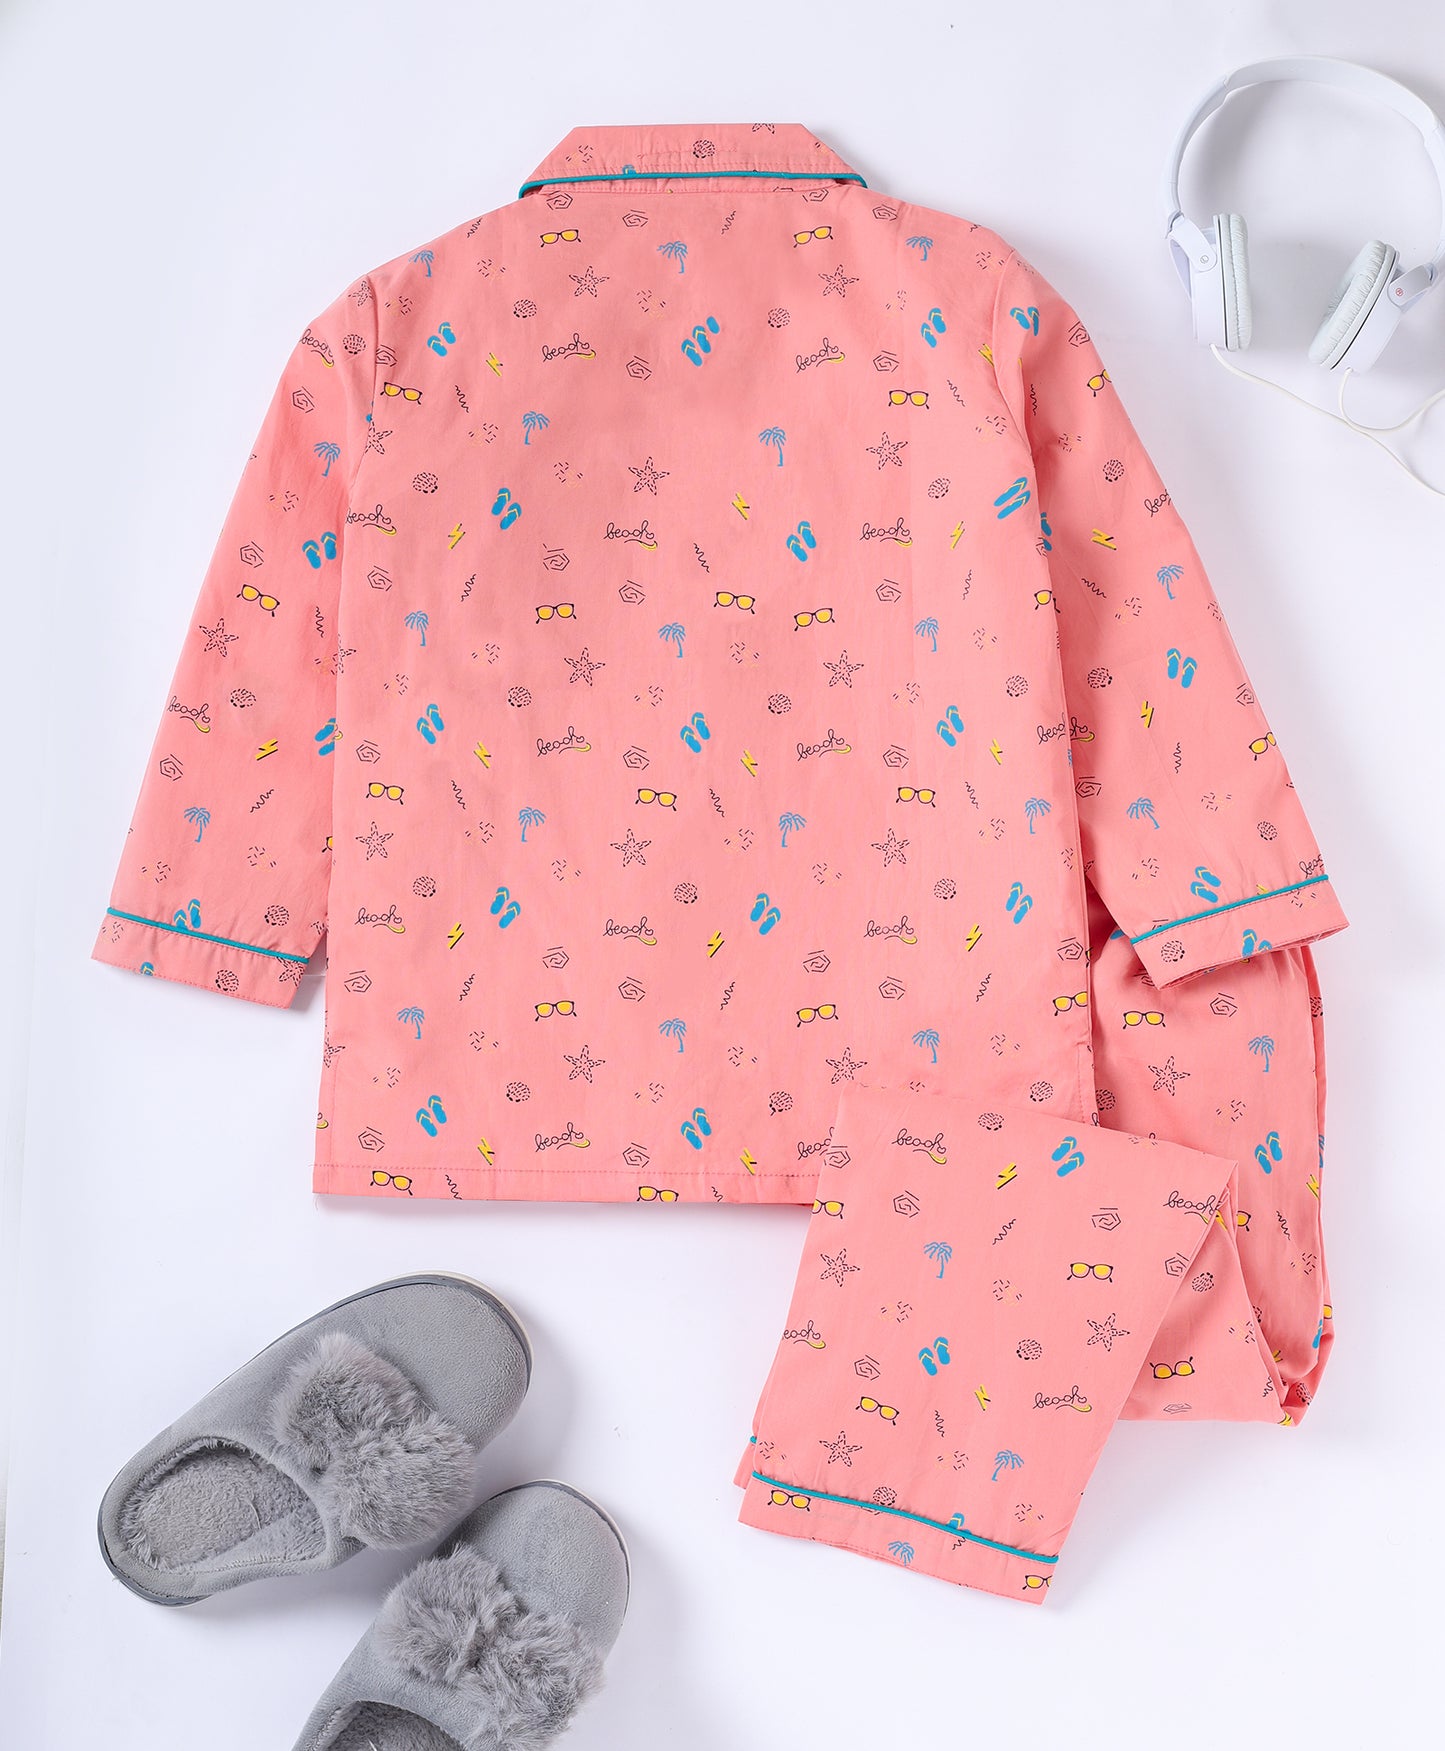 Beach Theme Printed Pure Cotton Night Suit for Kids